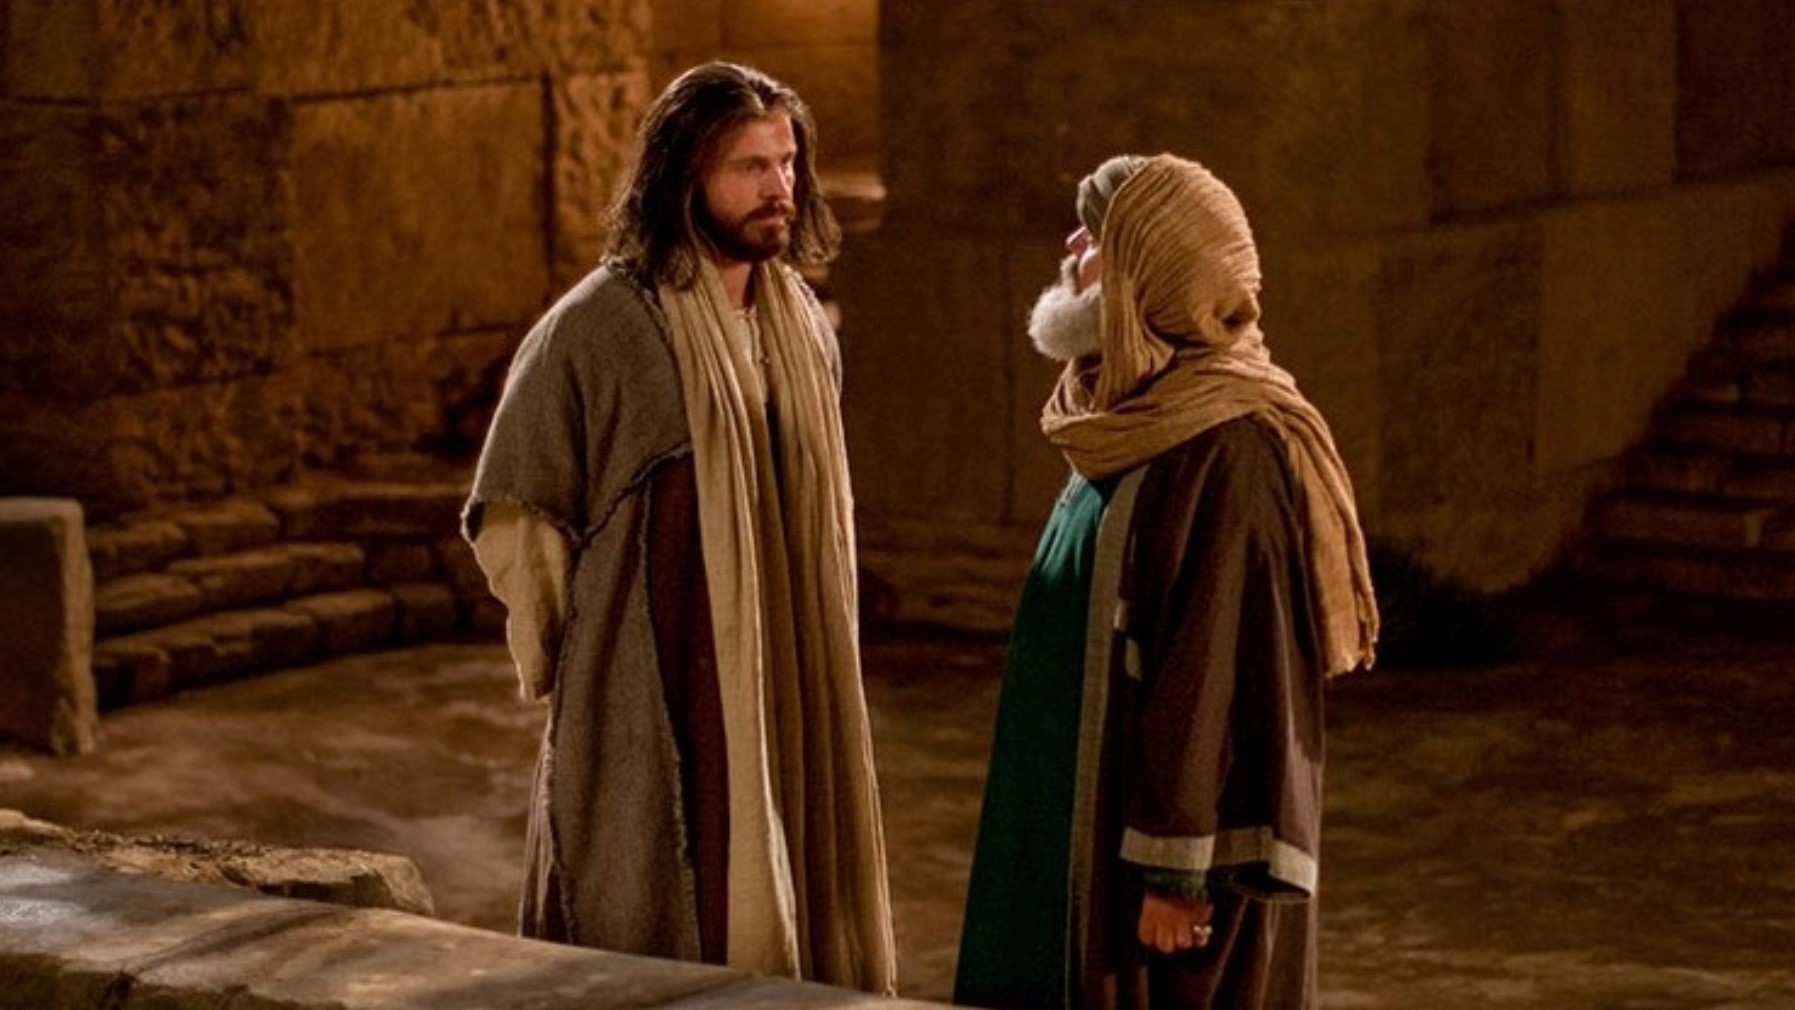 Conversation with Nicodemus I: "You Must Be Born All Over Again From Above" - (John 3:1-8)